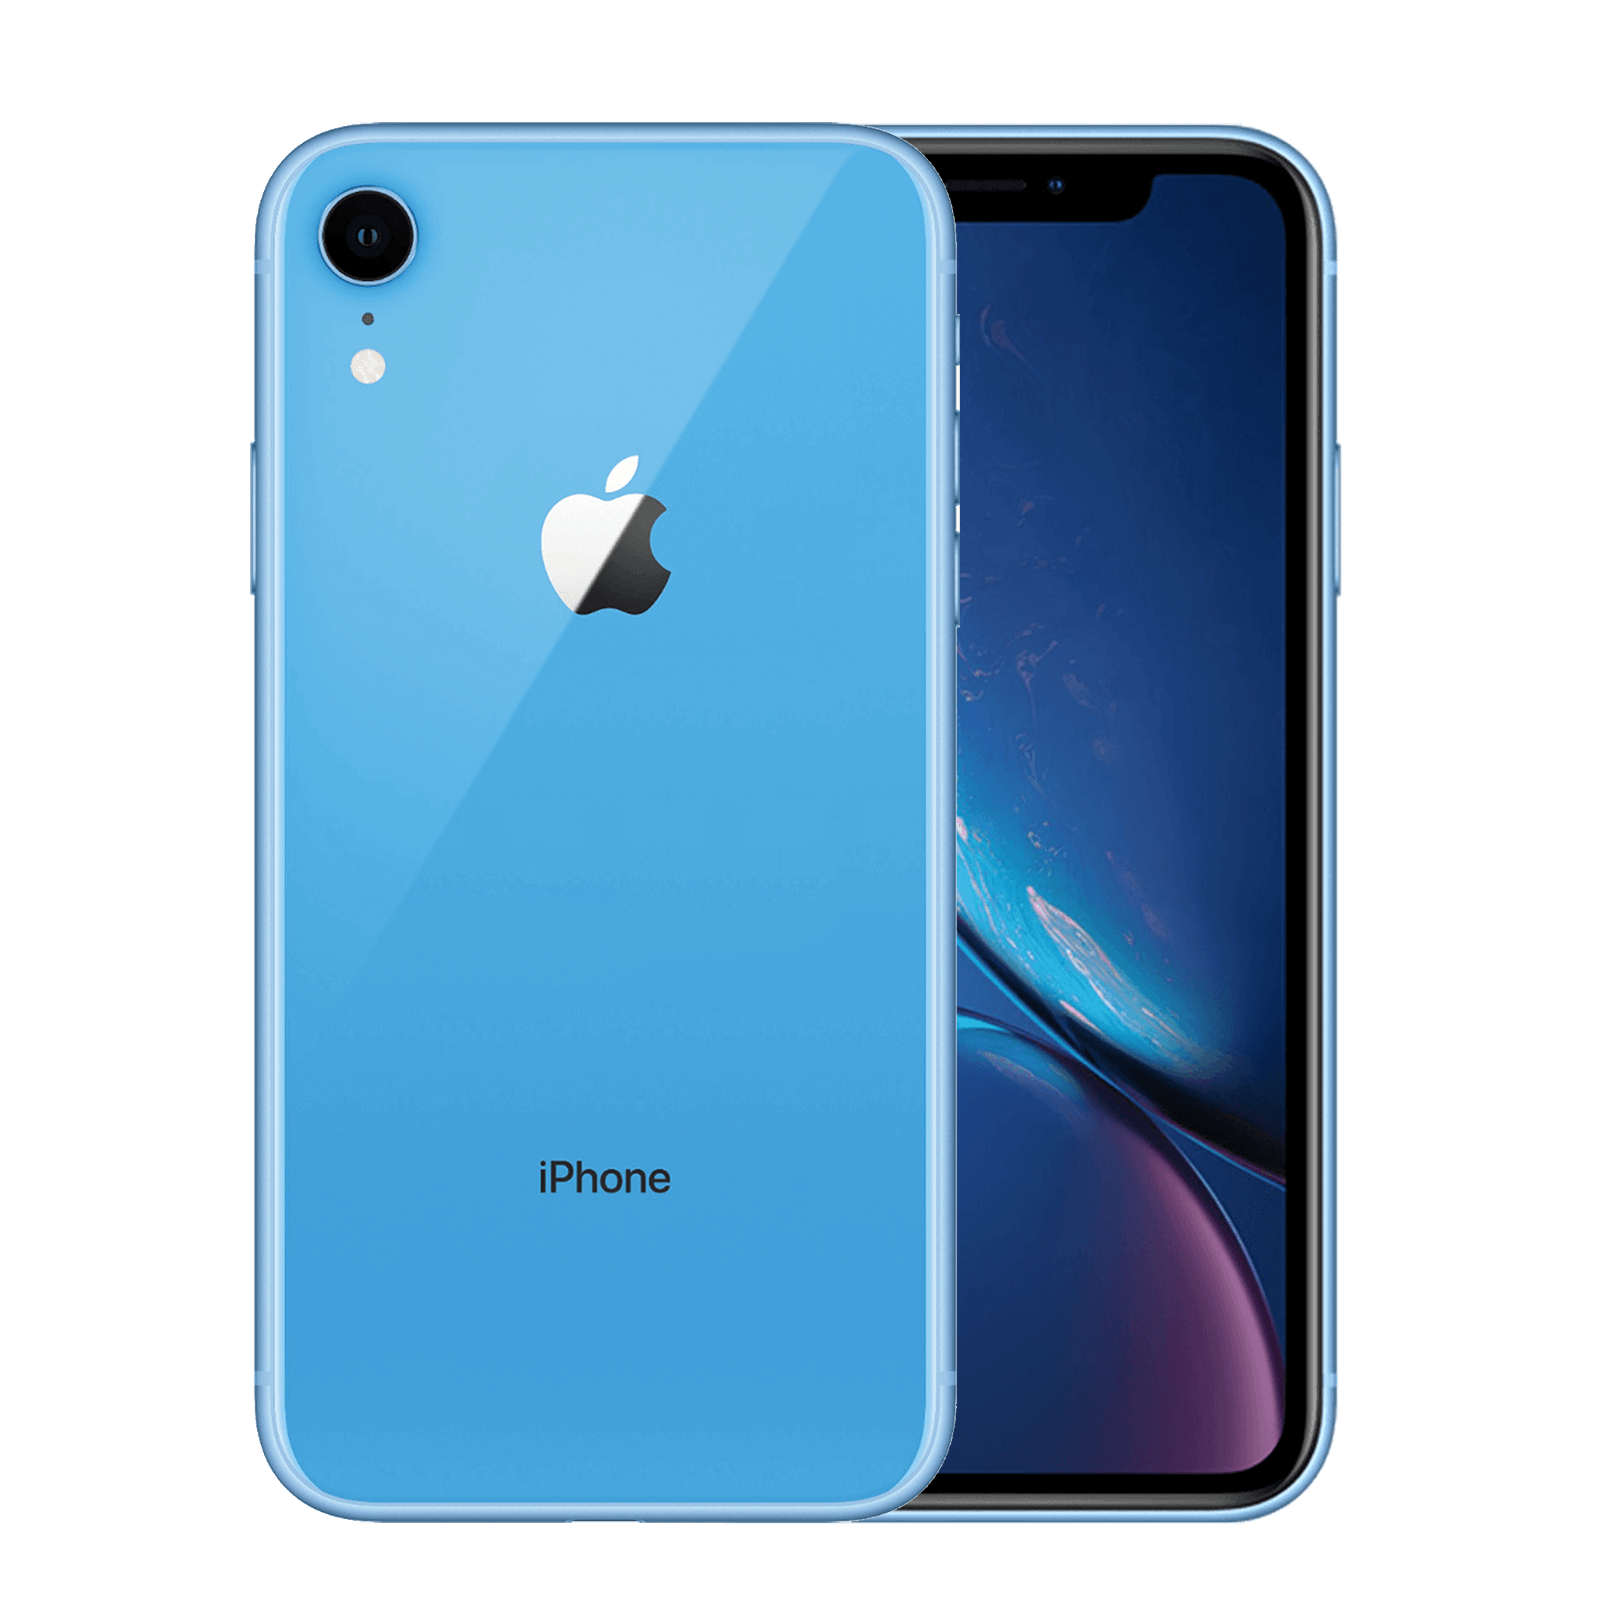 Apple iPhone XR 256GB Blue Very Good - AT&T